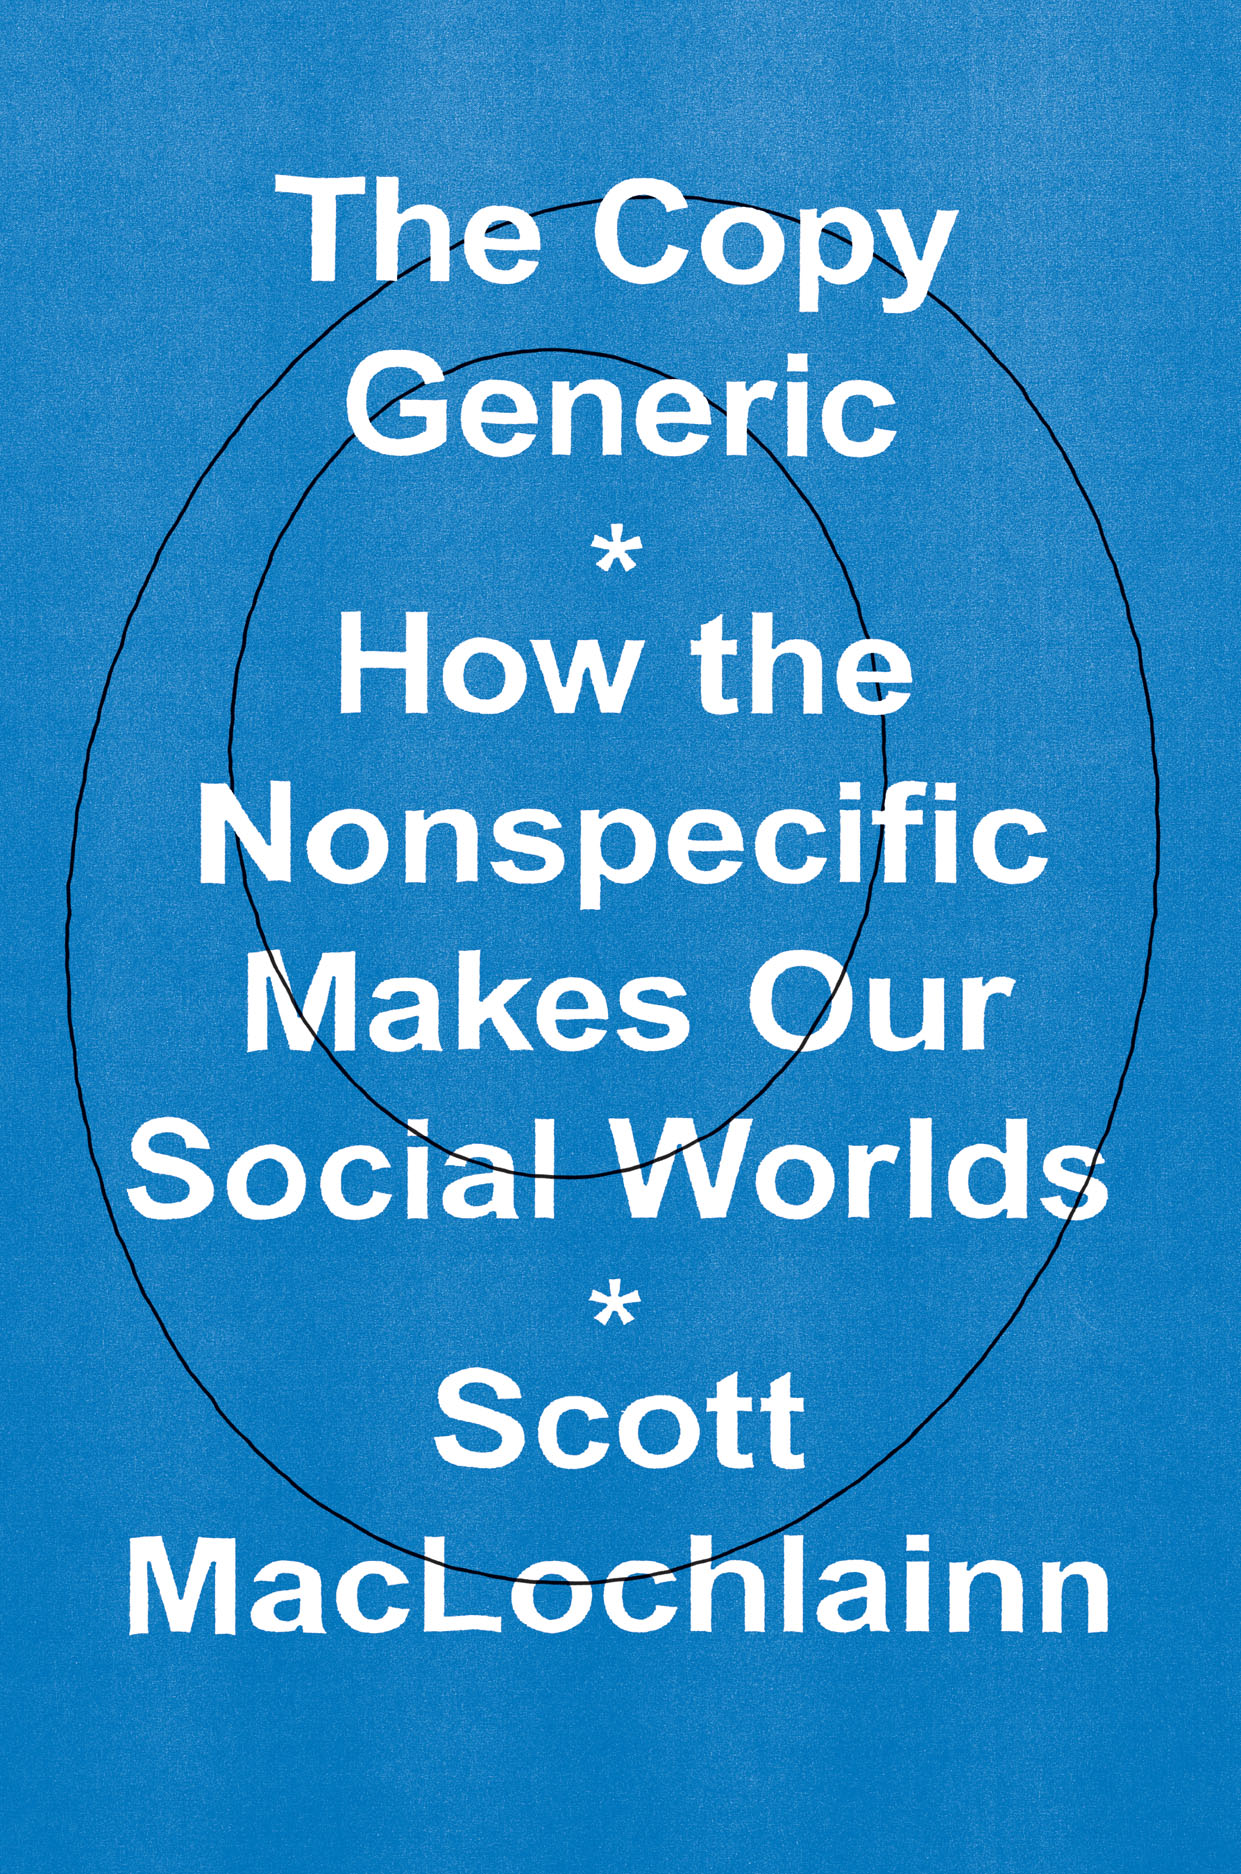 The Copy Generic: How the Nonspecific Makes Our Social Worlds, MacLochlainn